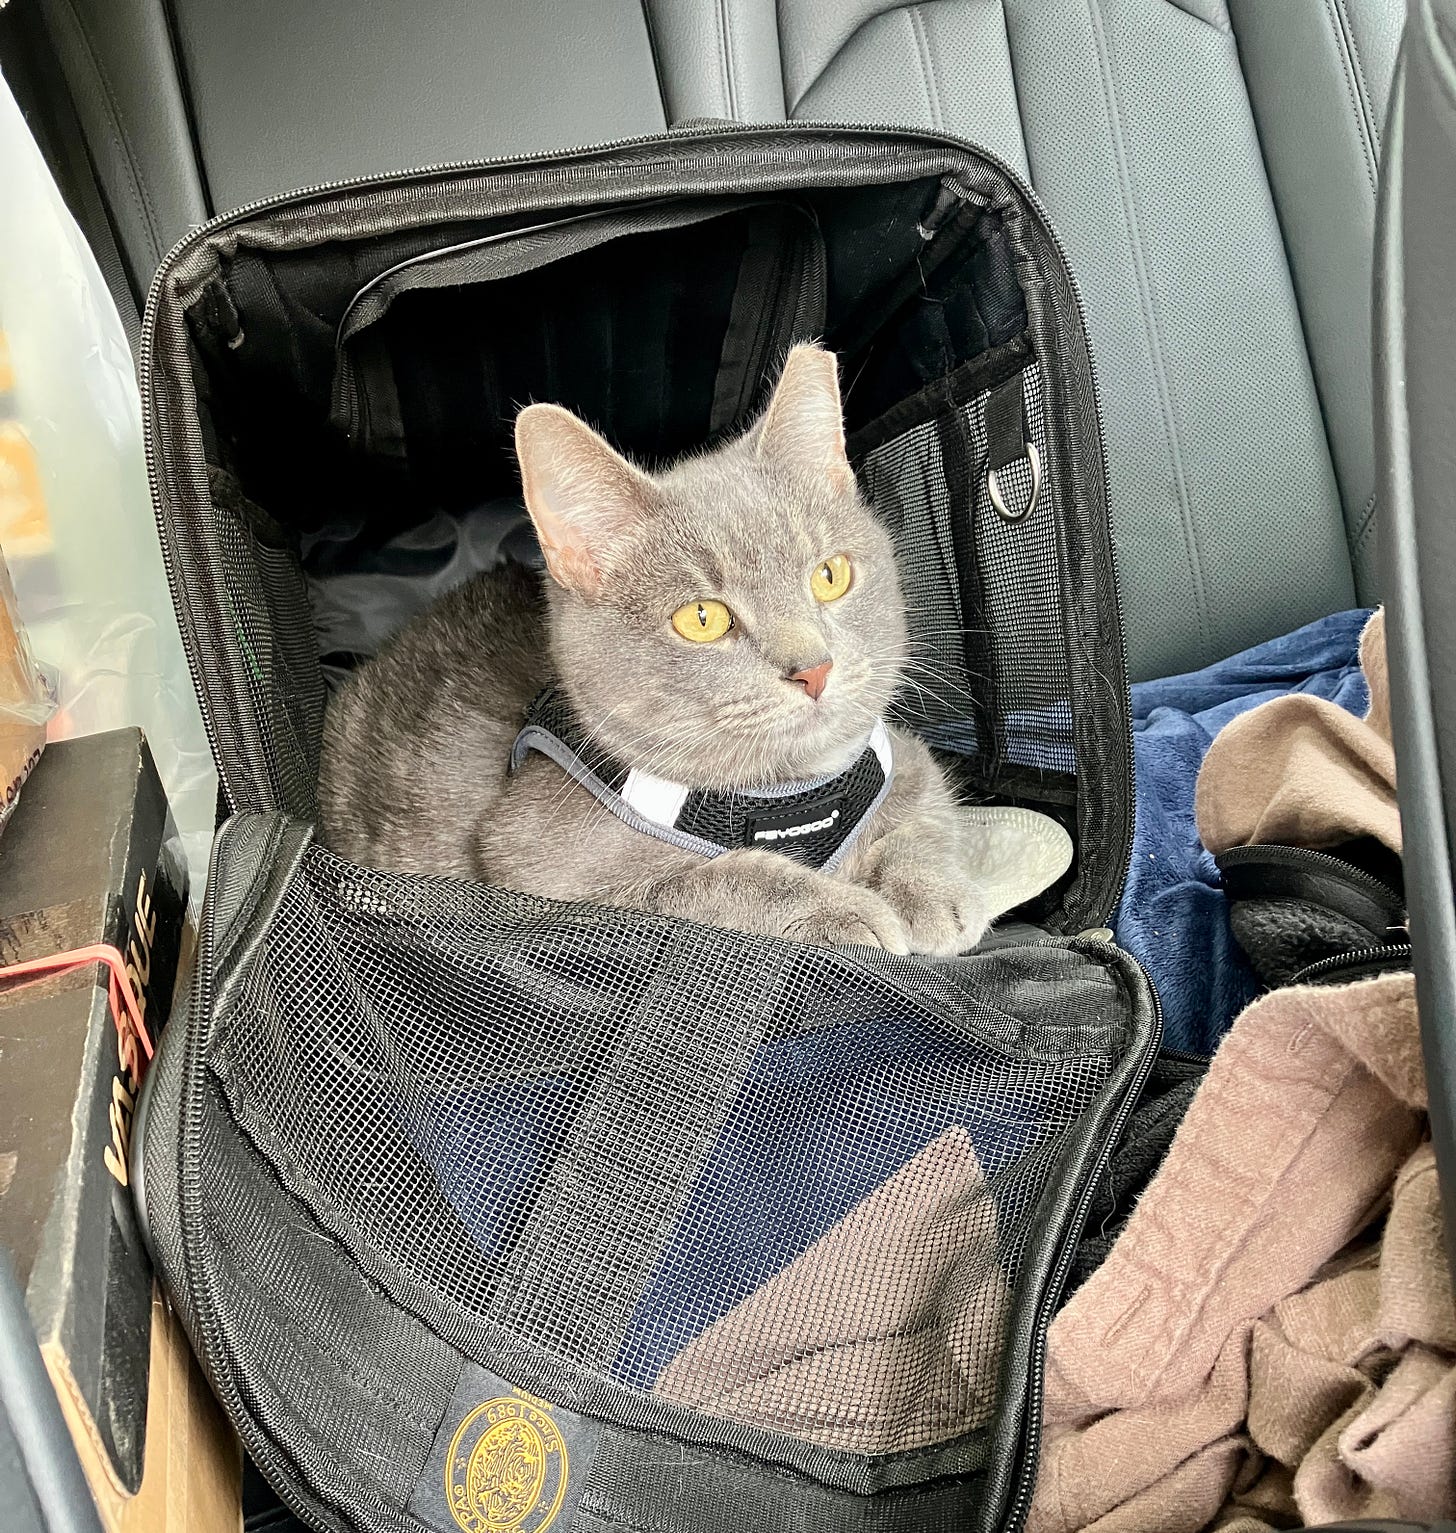 My cat in the back seat of the car in her carrier with the front door open.